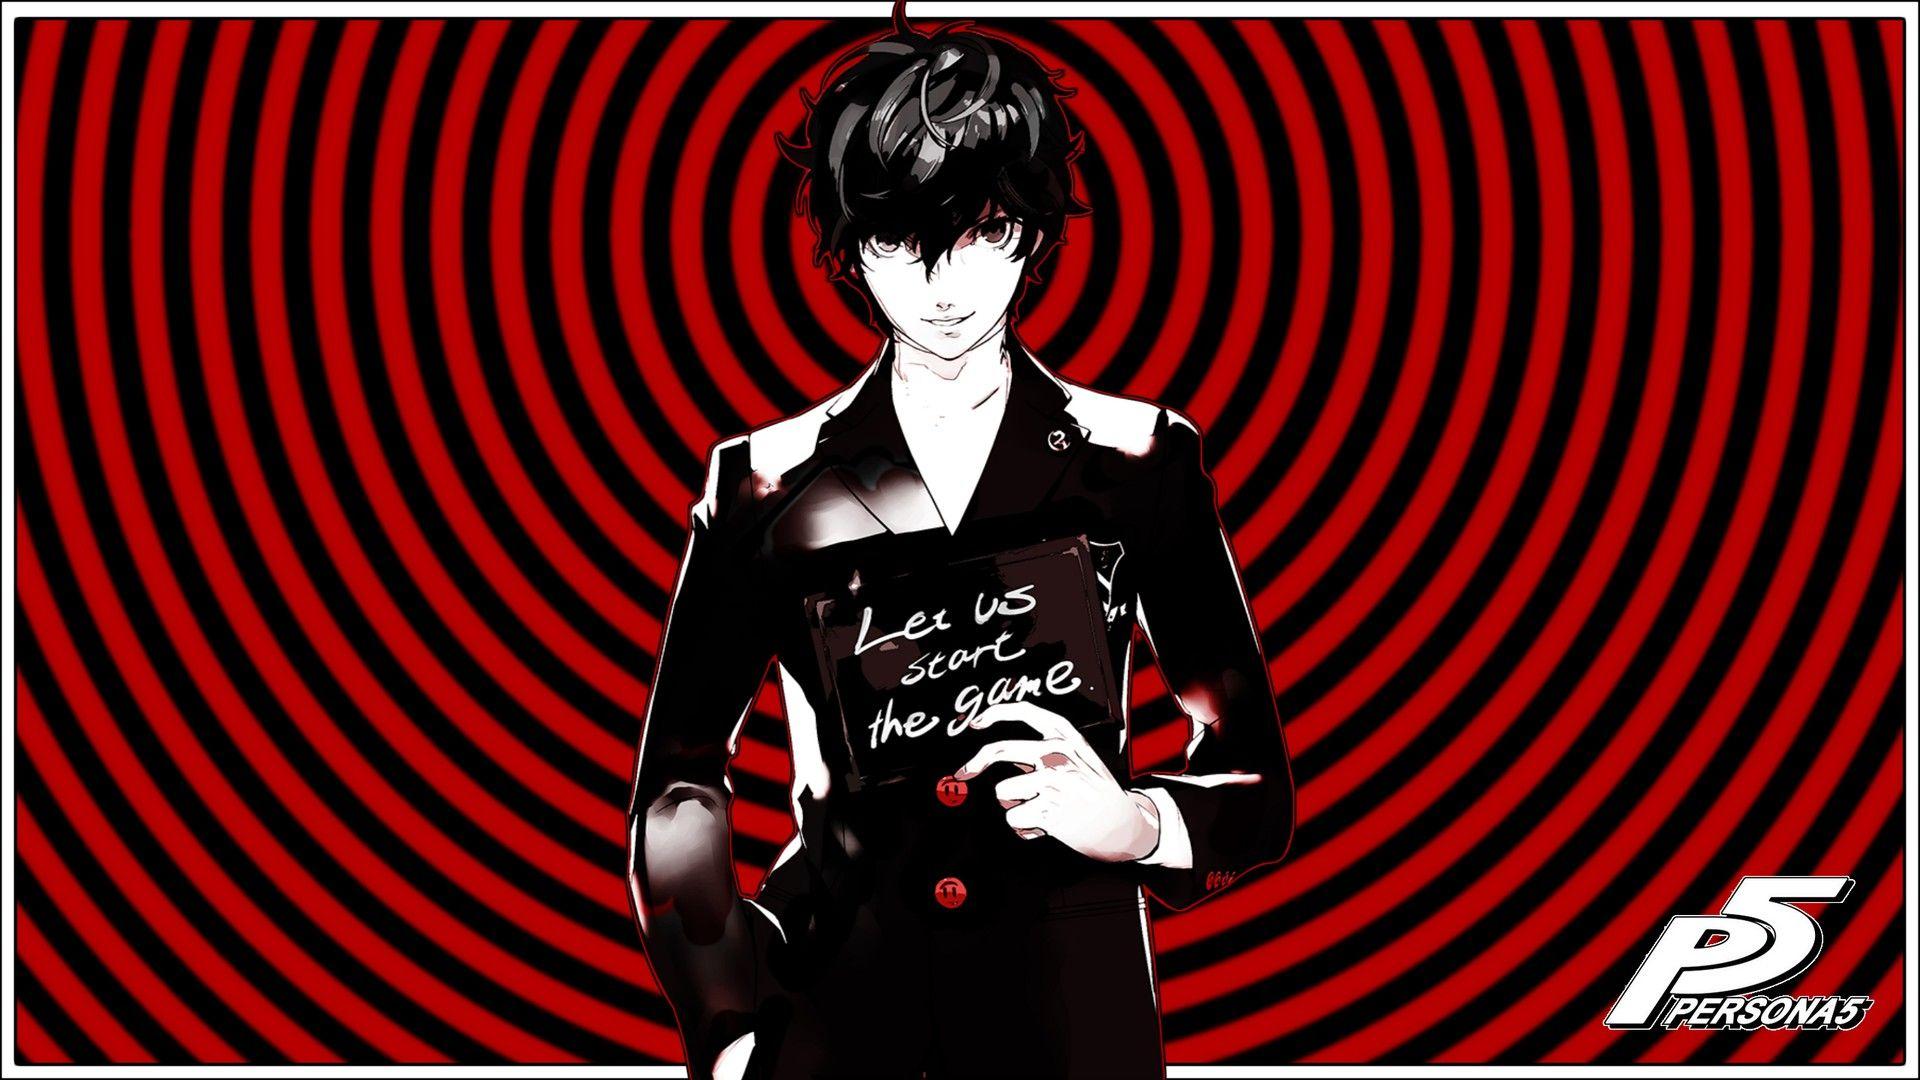 Portrait of a character from Persona 5. Wallpaper from Persona 5